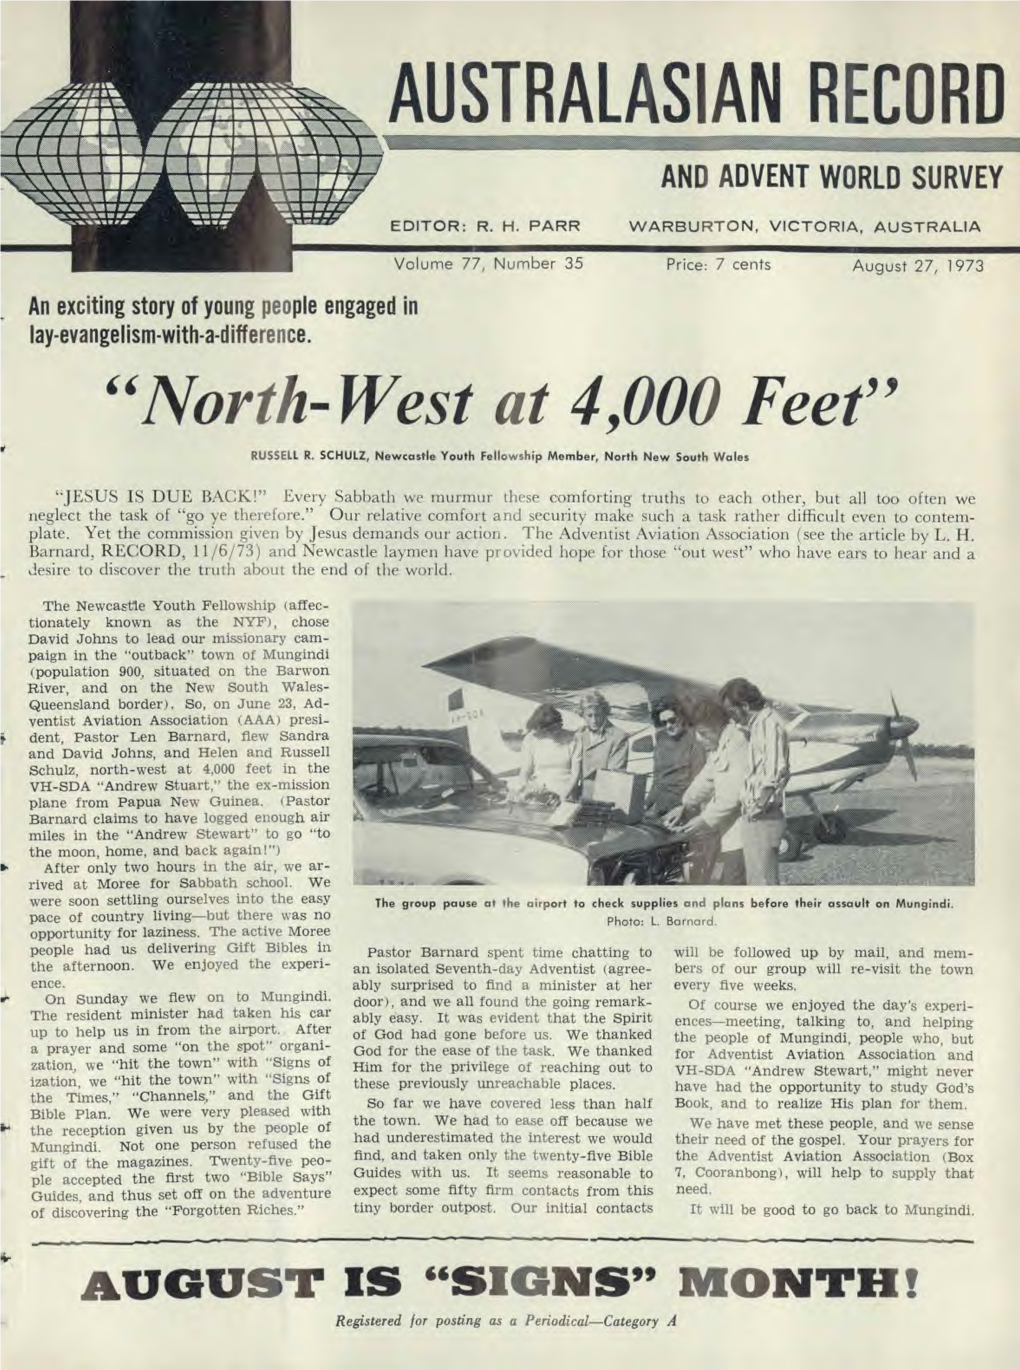 "North- West at 4,000 Feet"